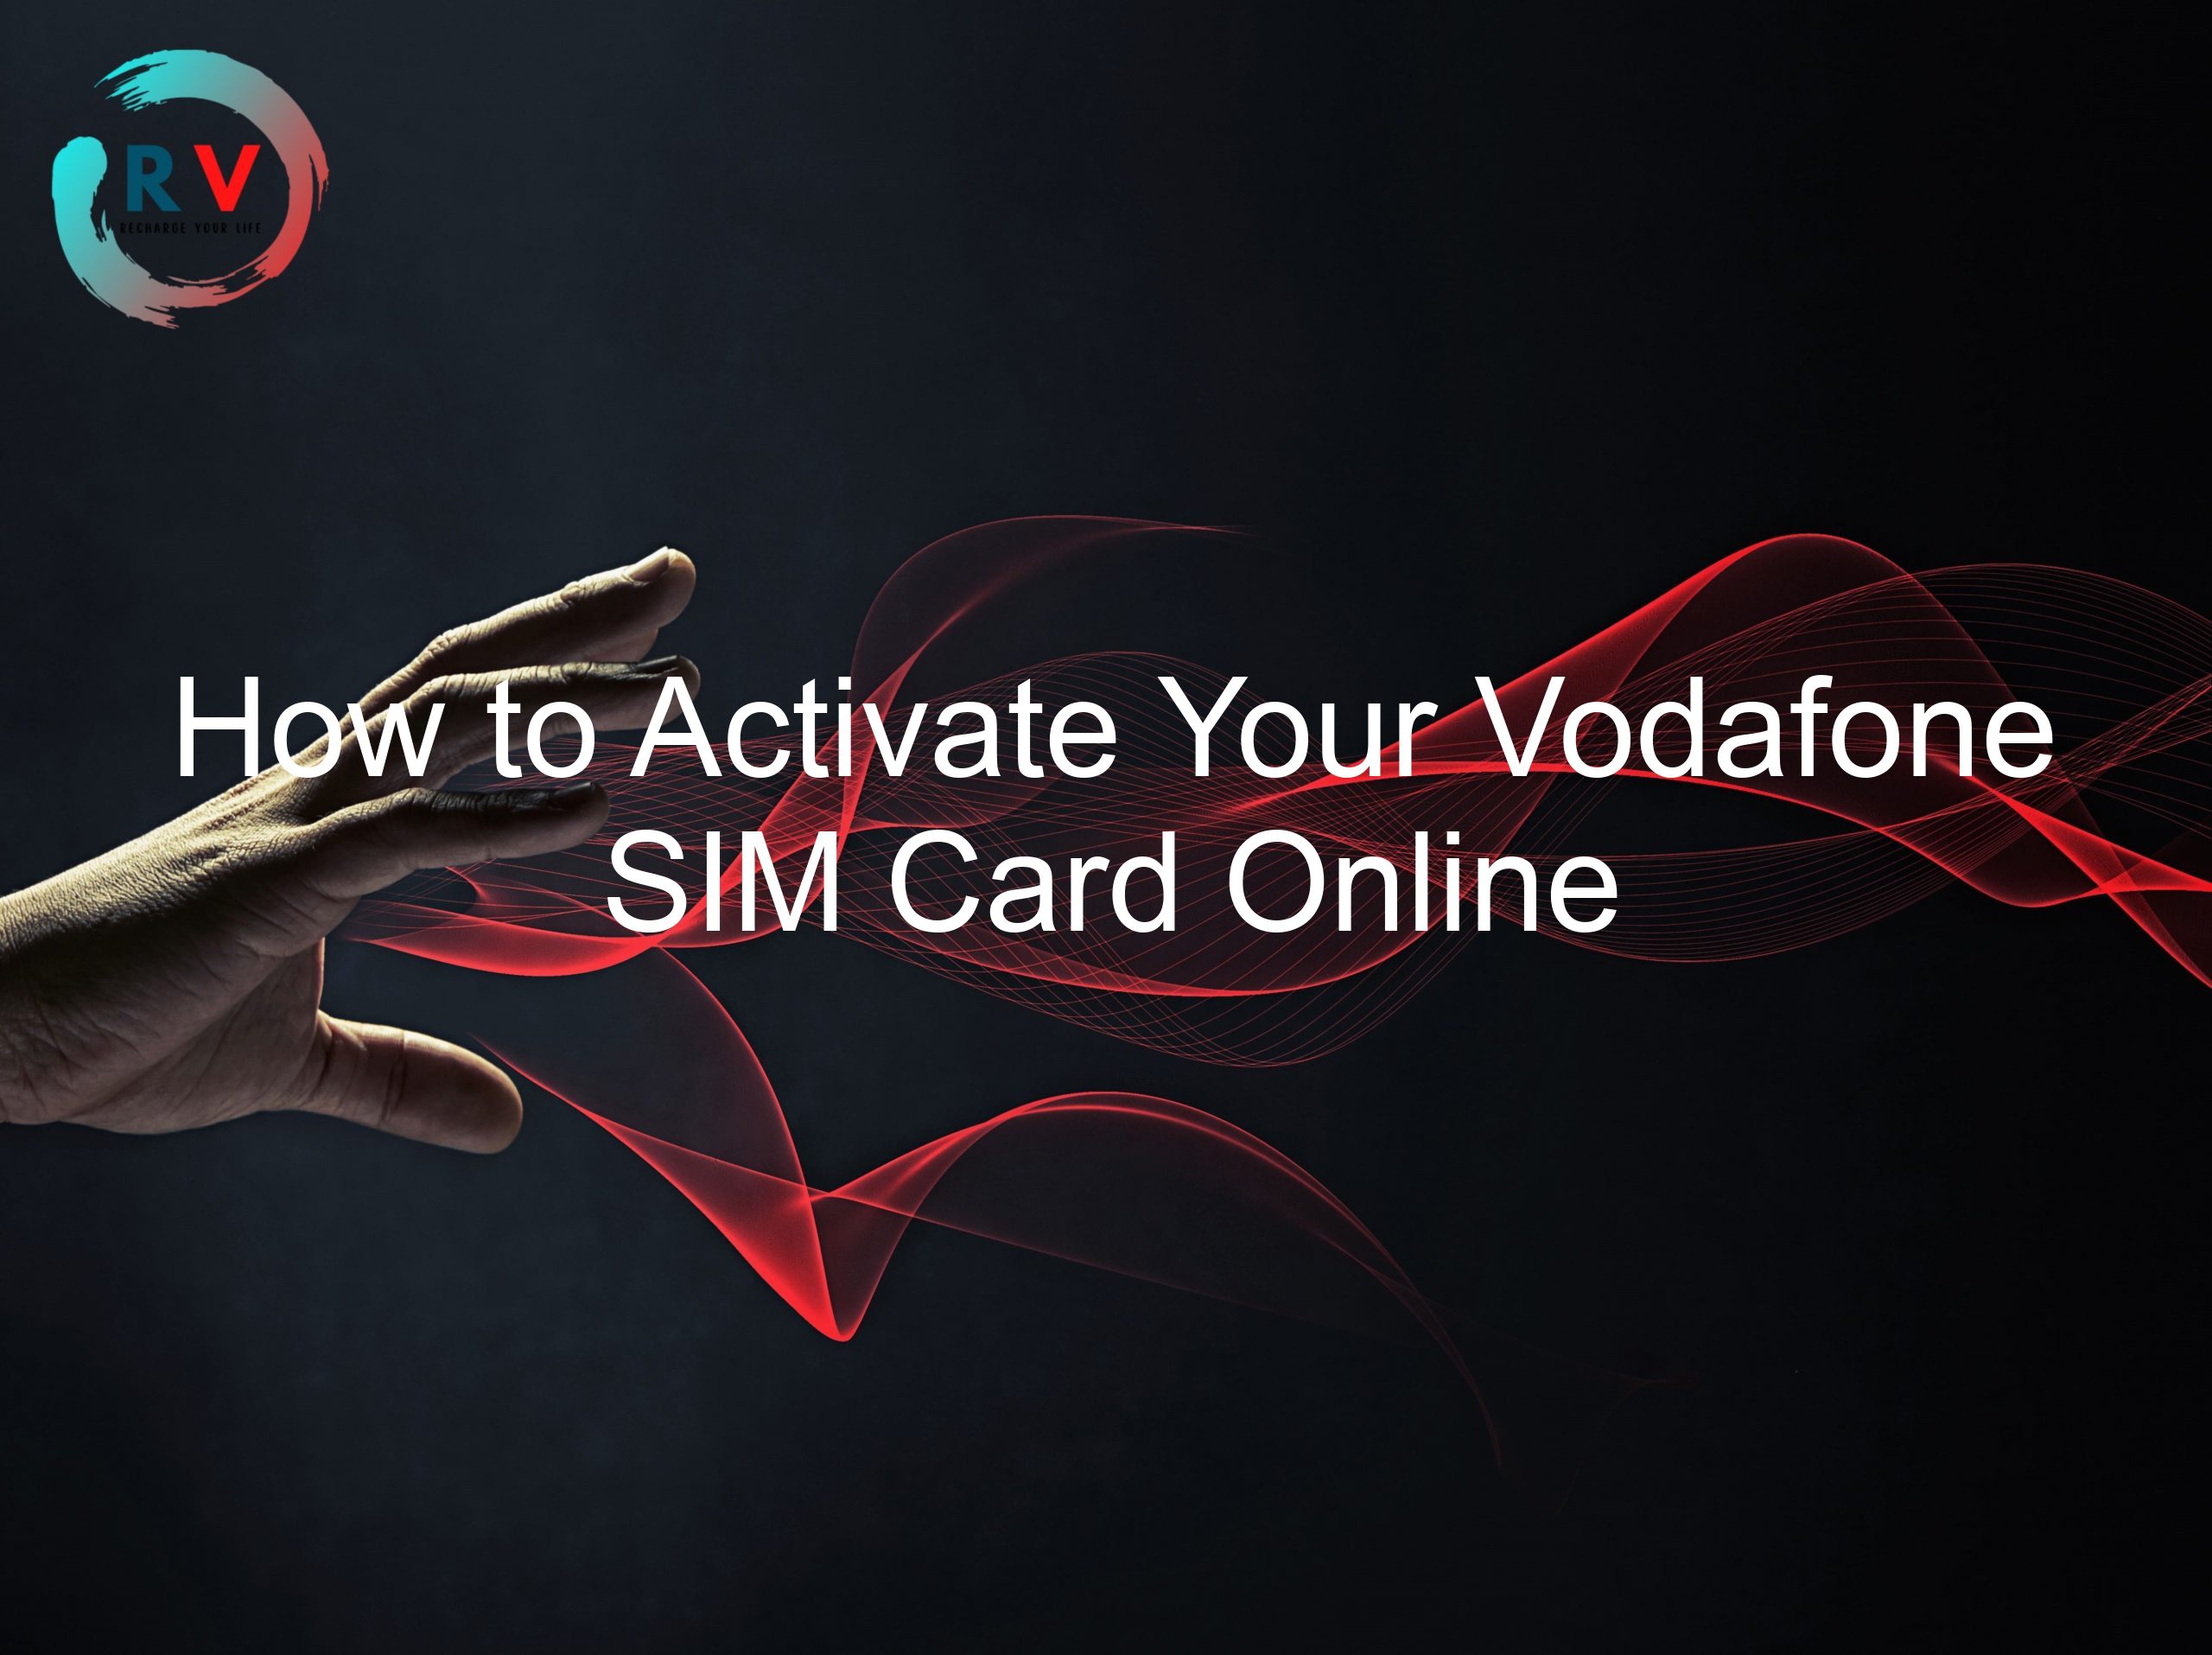 How to Activate Your Vodafone SIM Card Online